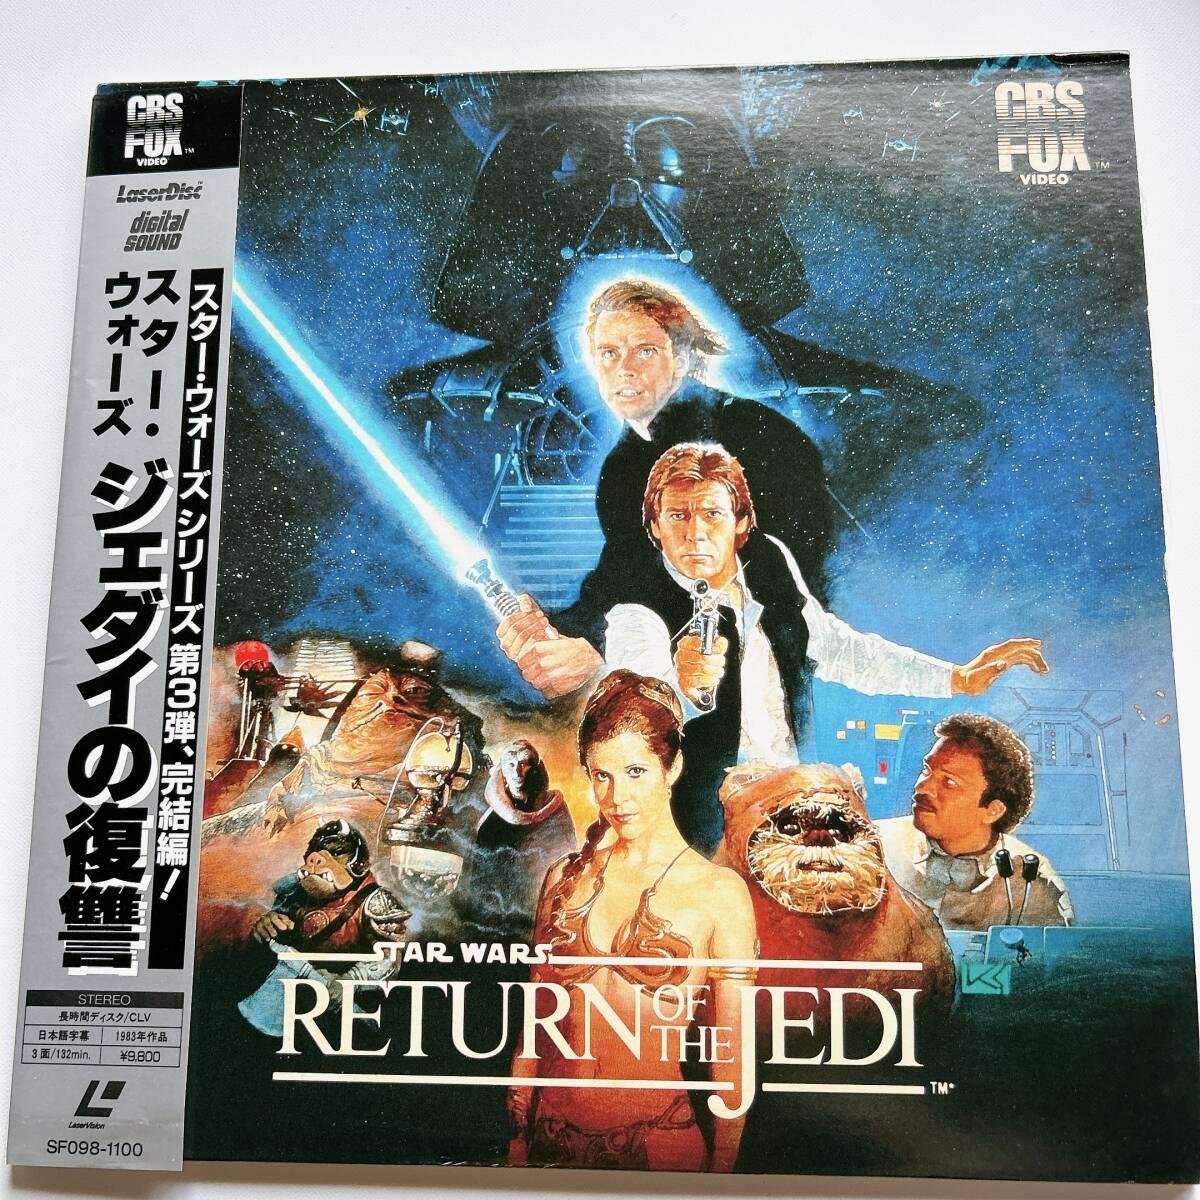 1 jpy used LD Star Wars Return of the Jedi STAR WARS RETURN OF THE JEDI third . laser disk reproduction has confirmed 3